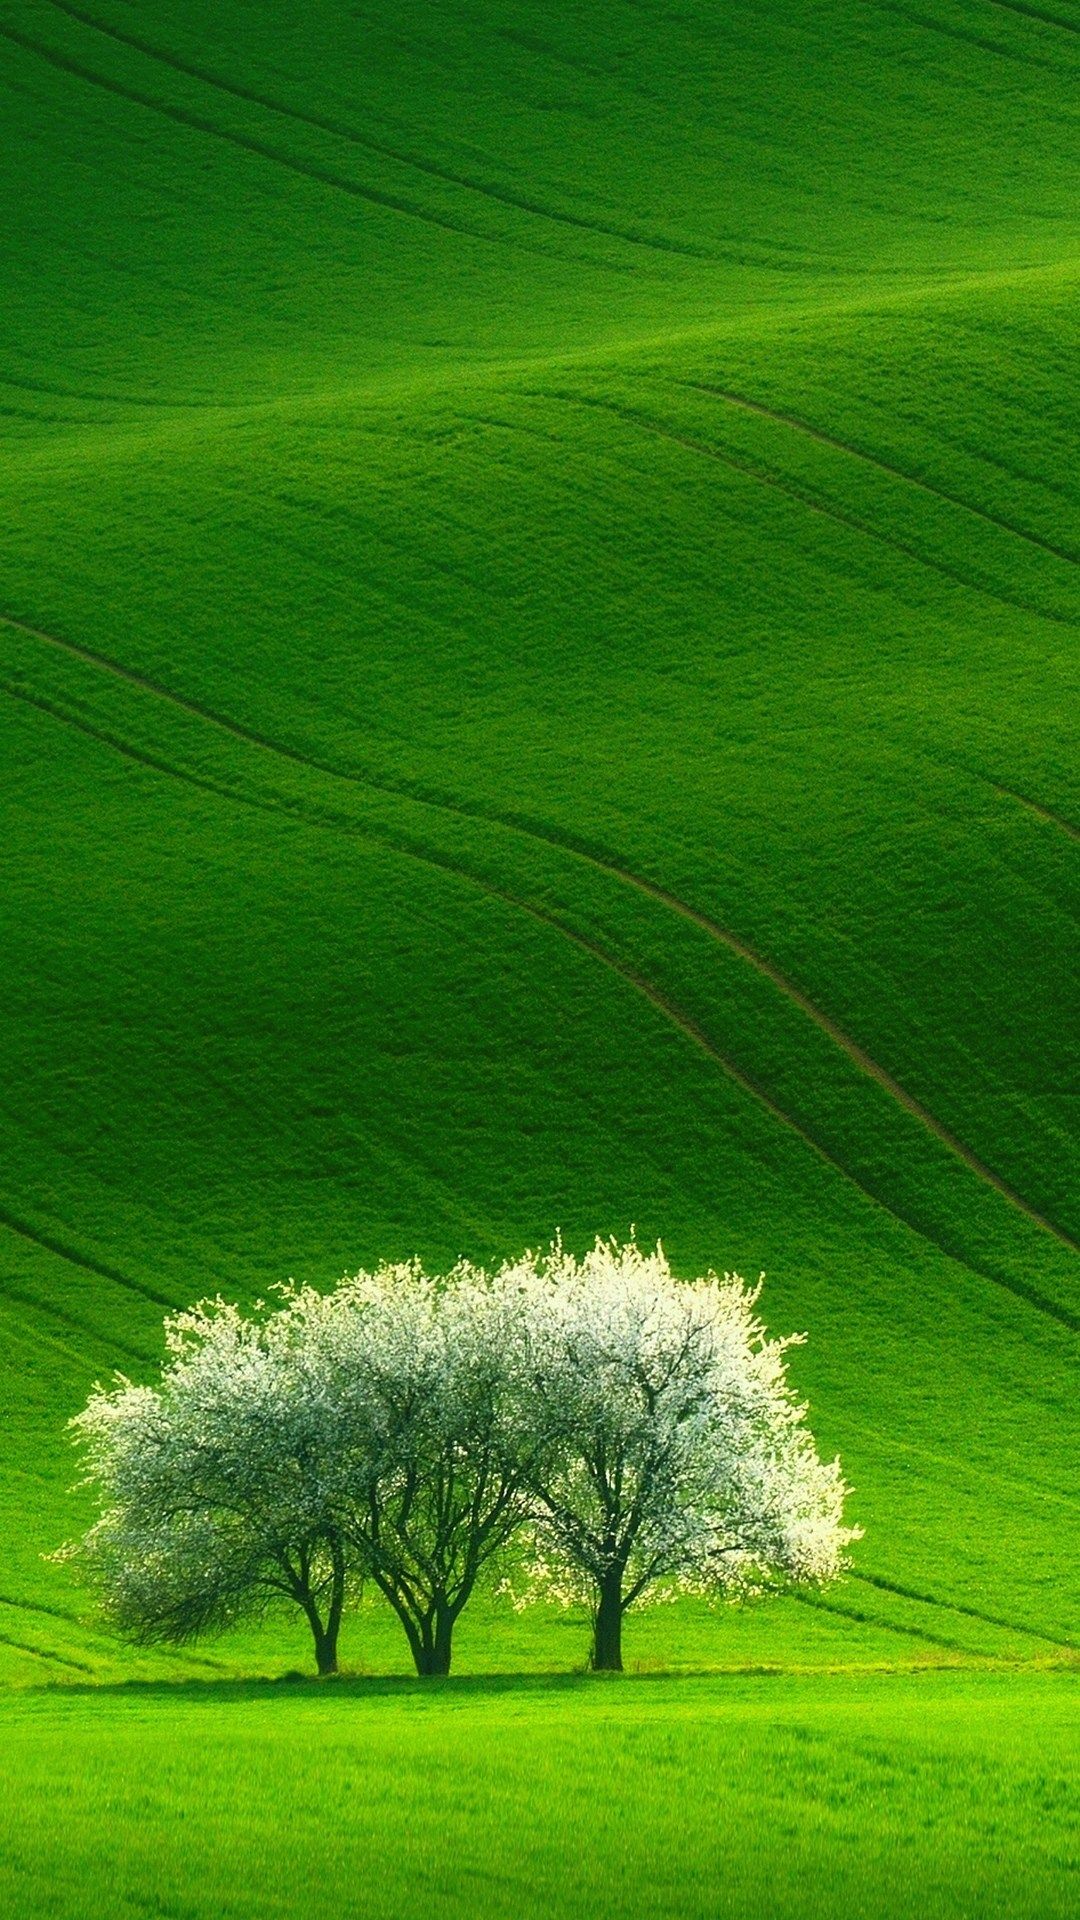 Green Scenery Wallpapers